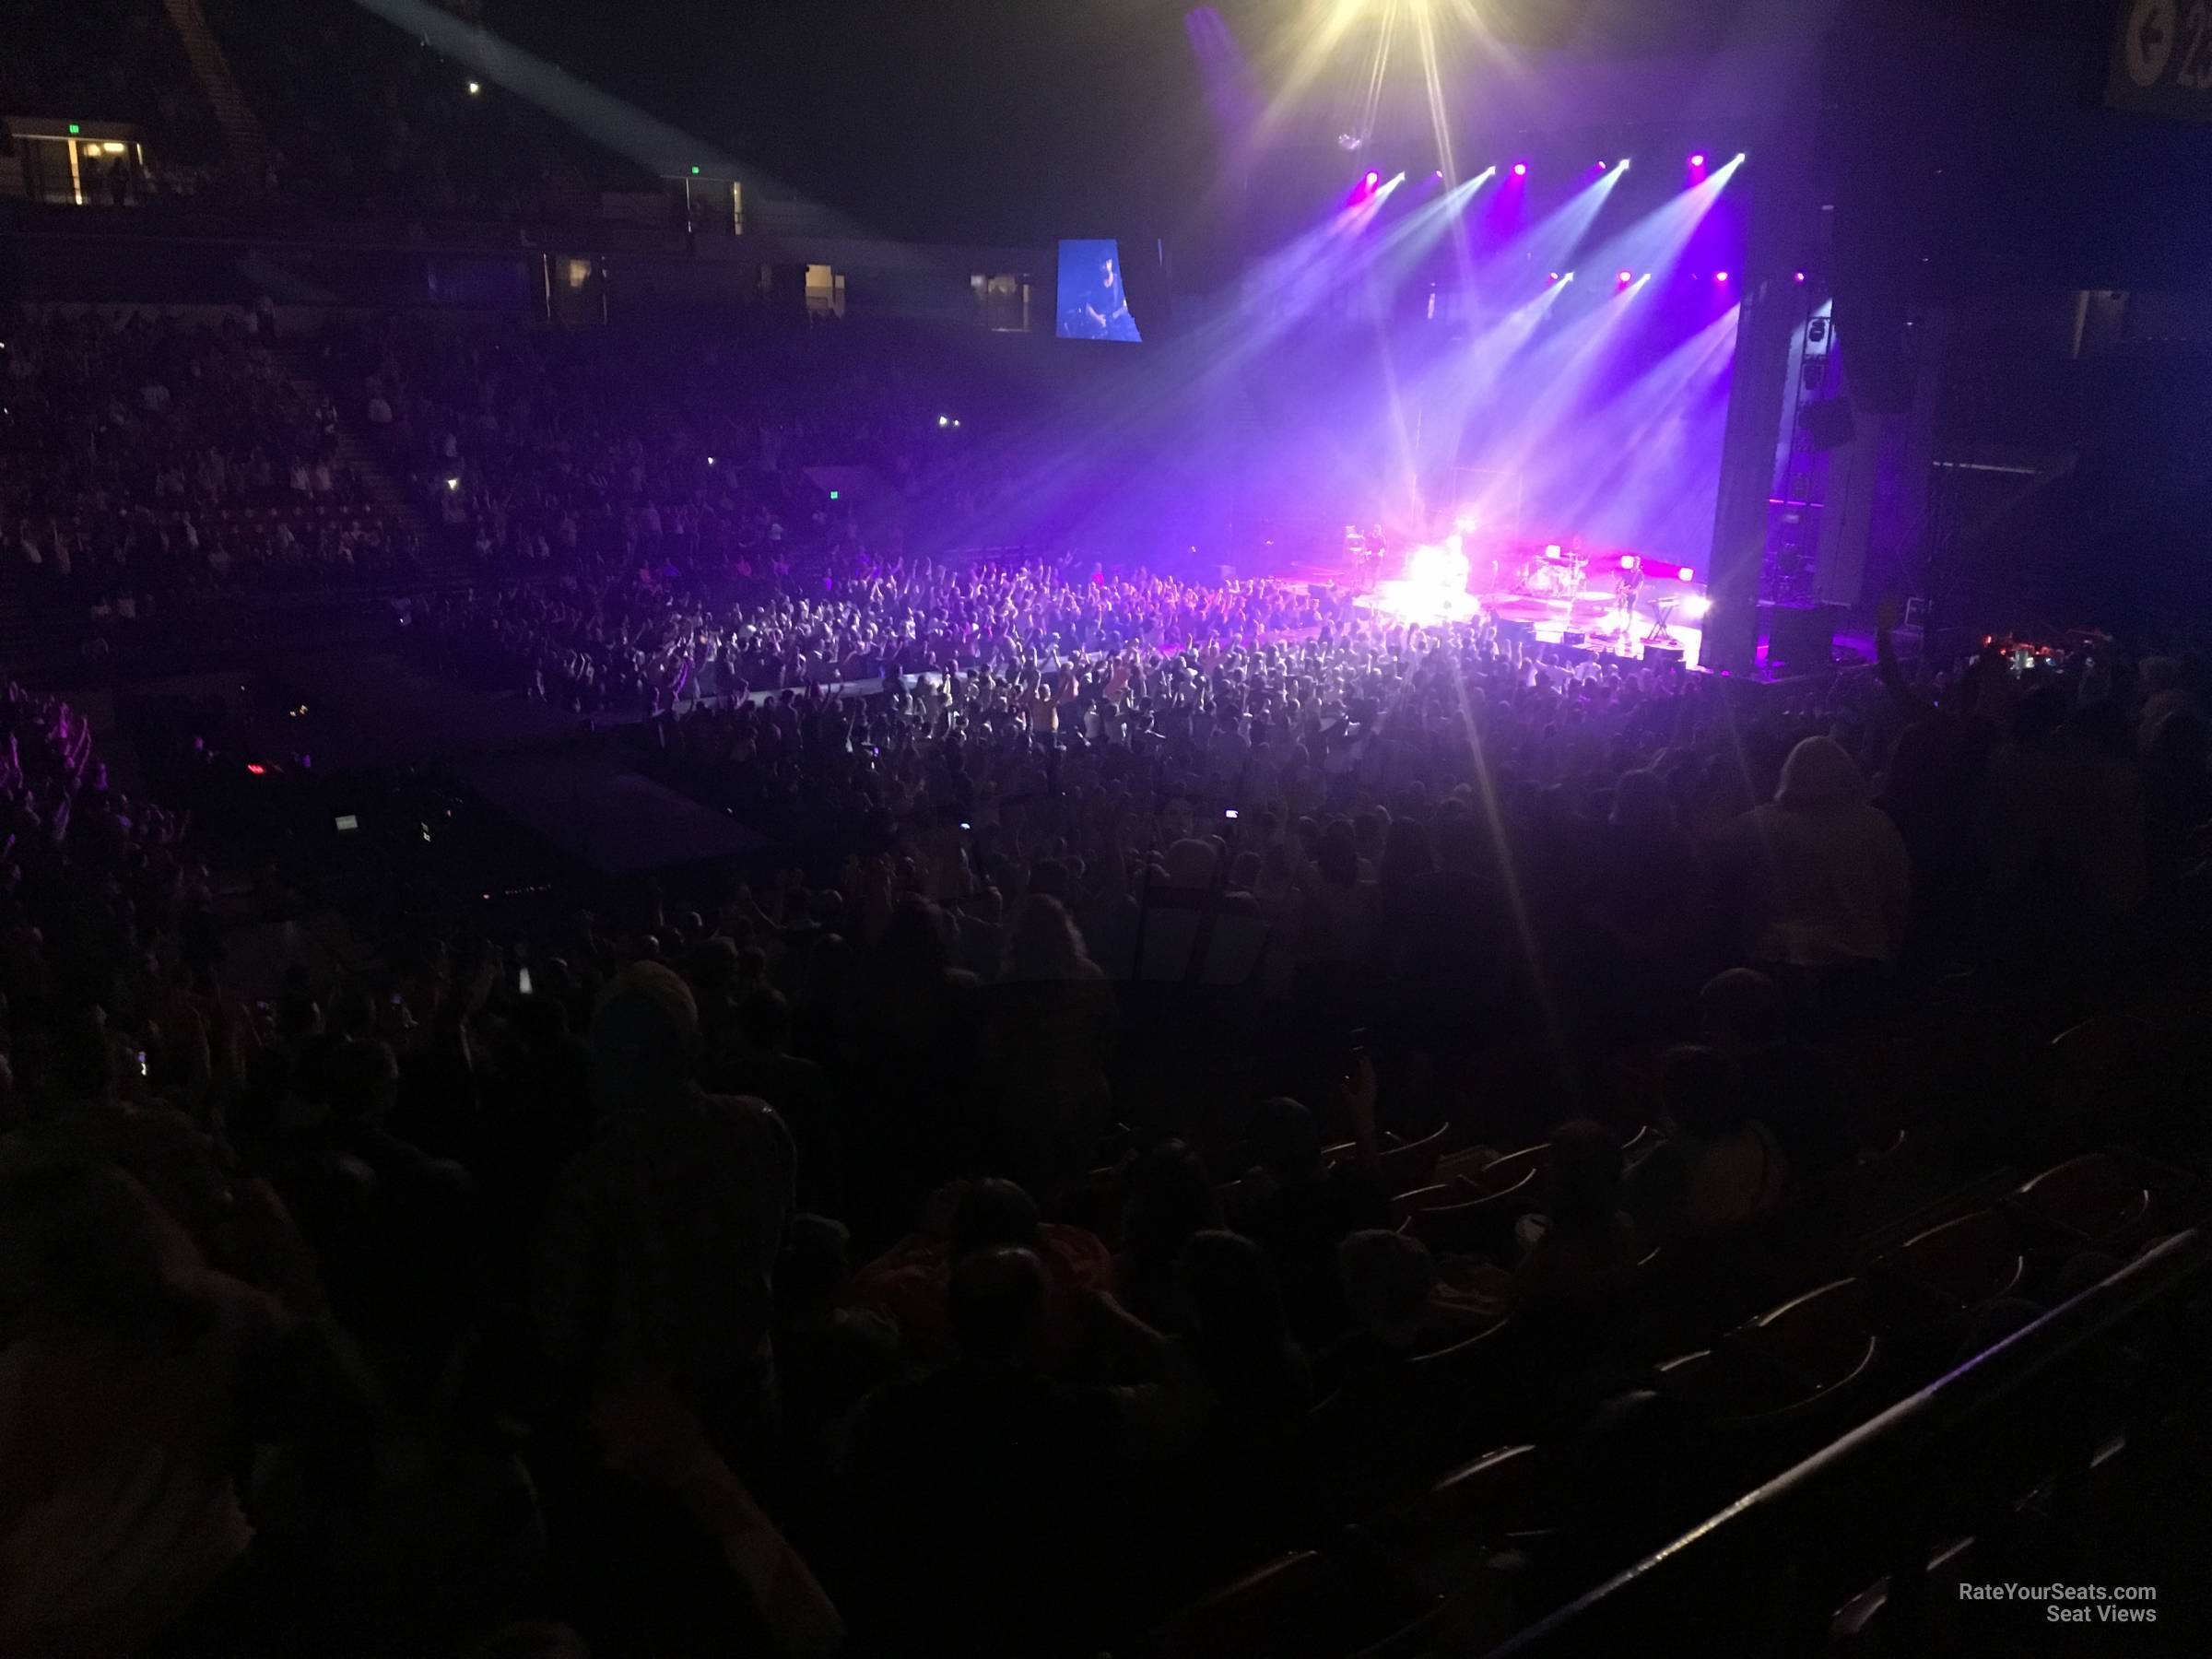 section 115, row x seat view  for concert - legacy arena at the bjcc